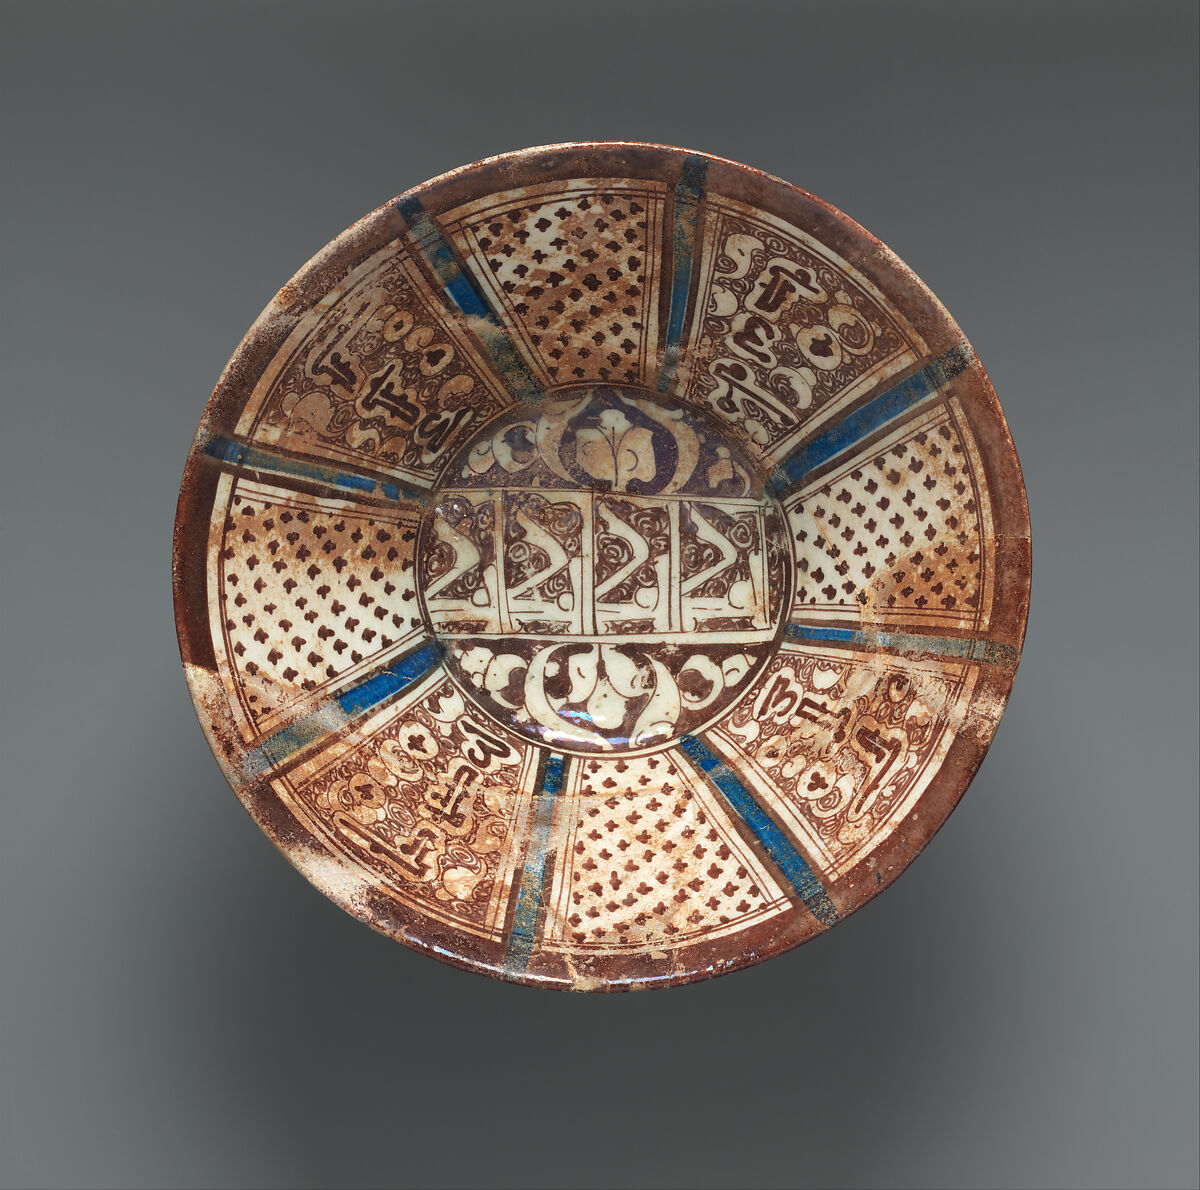 Ceramic Bowl Inscribed with "'Izz" ("Glory"), Stonepaste; underglaze-painted, glazed (transparent colorless), luster-painted